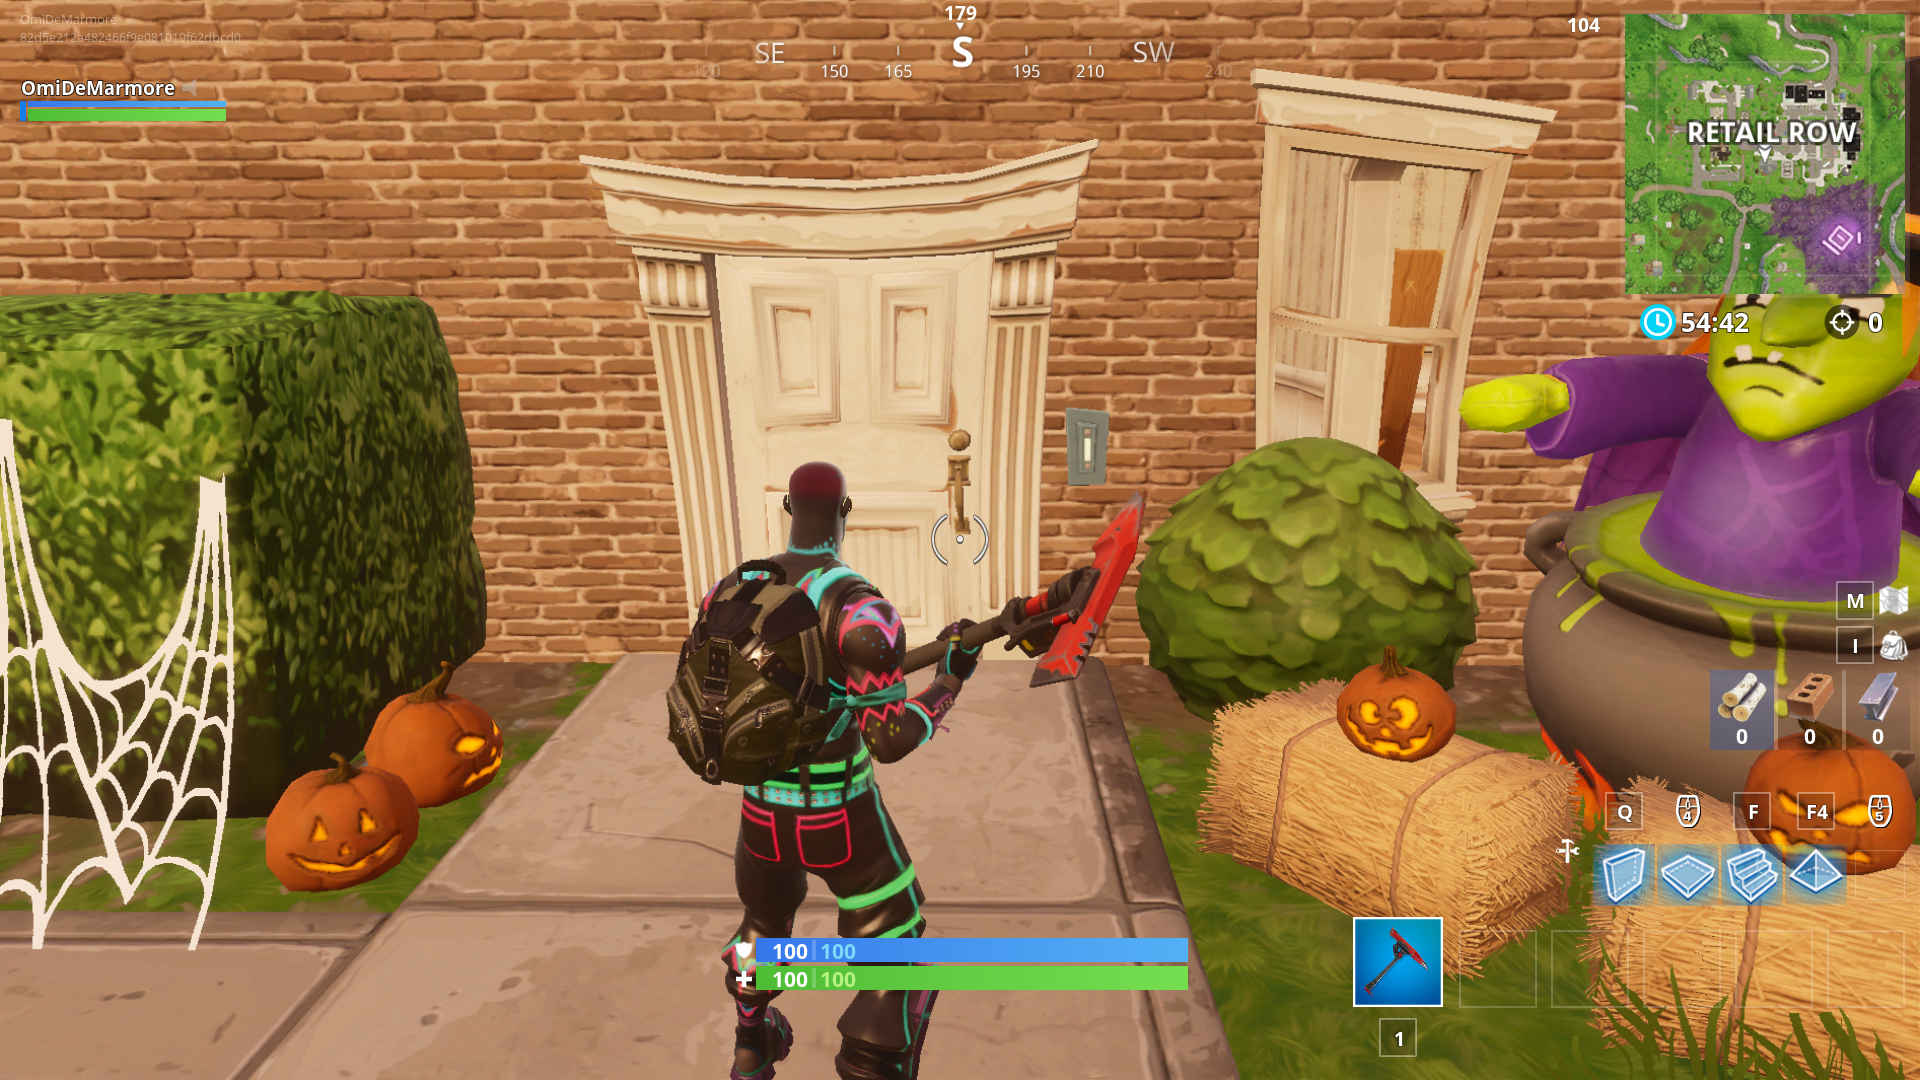 Fortnite Doorbell Locations Guide Season 7 Week 3 Challenge Dot - where to ring a doorbell in fortnite for the season 7 week 3 challenge